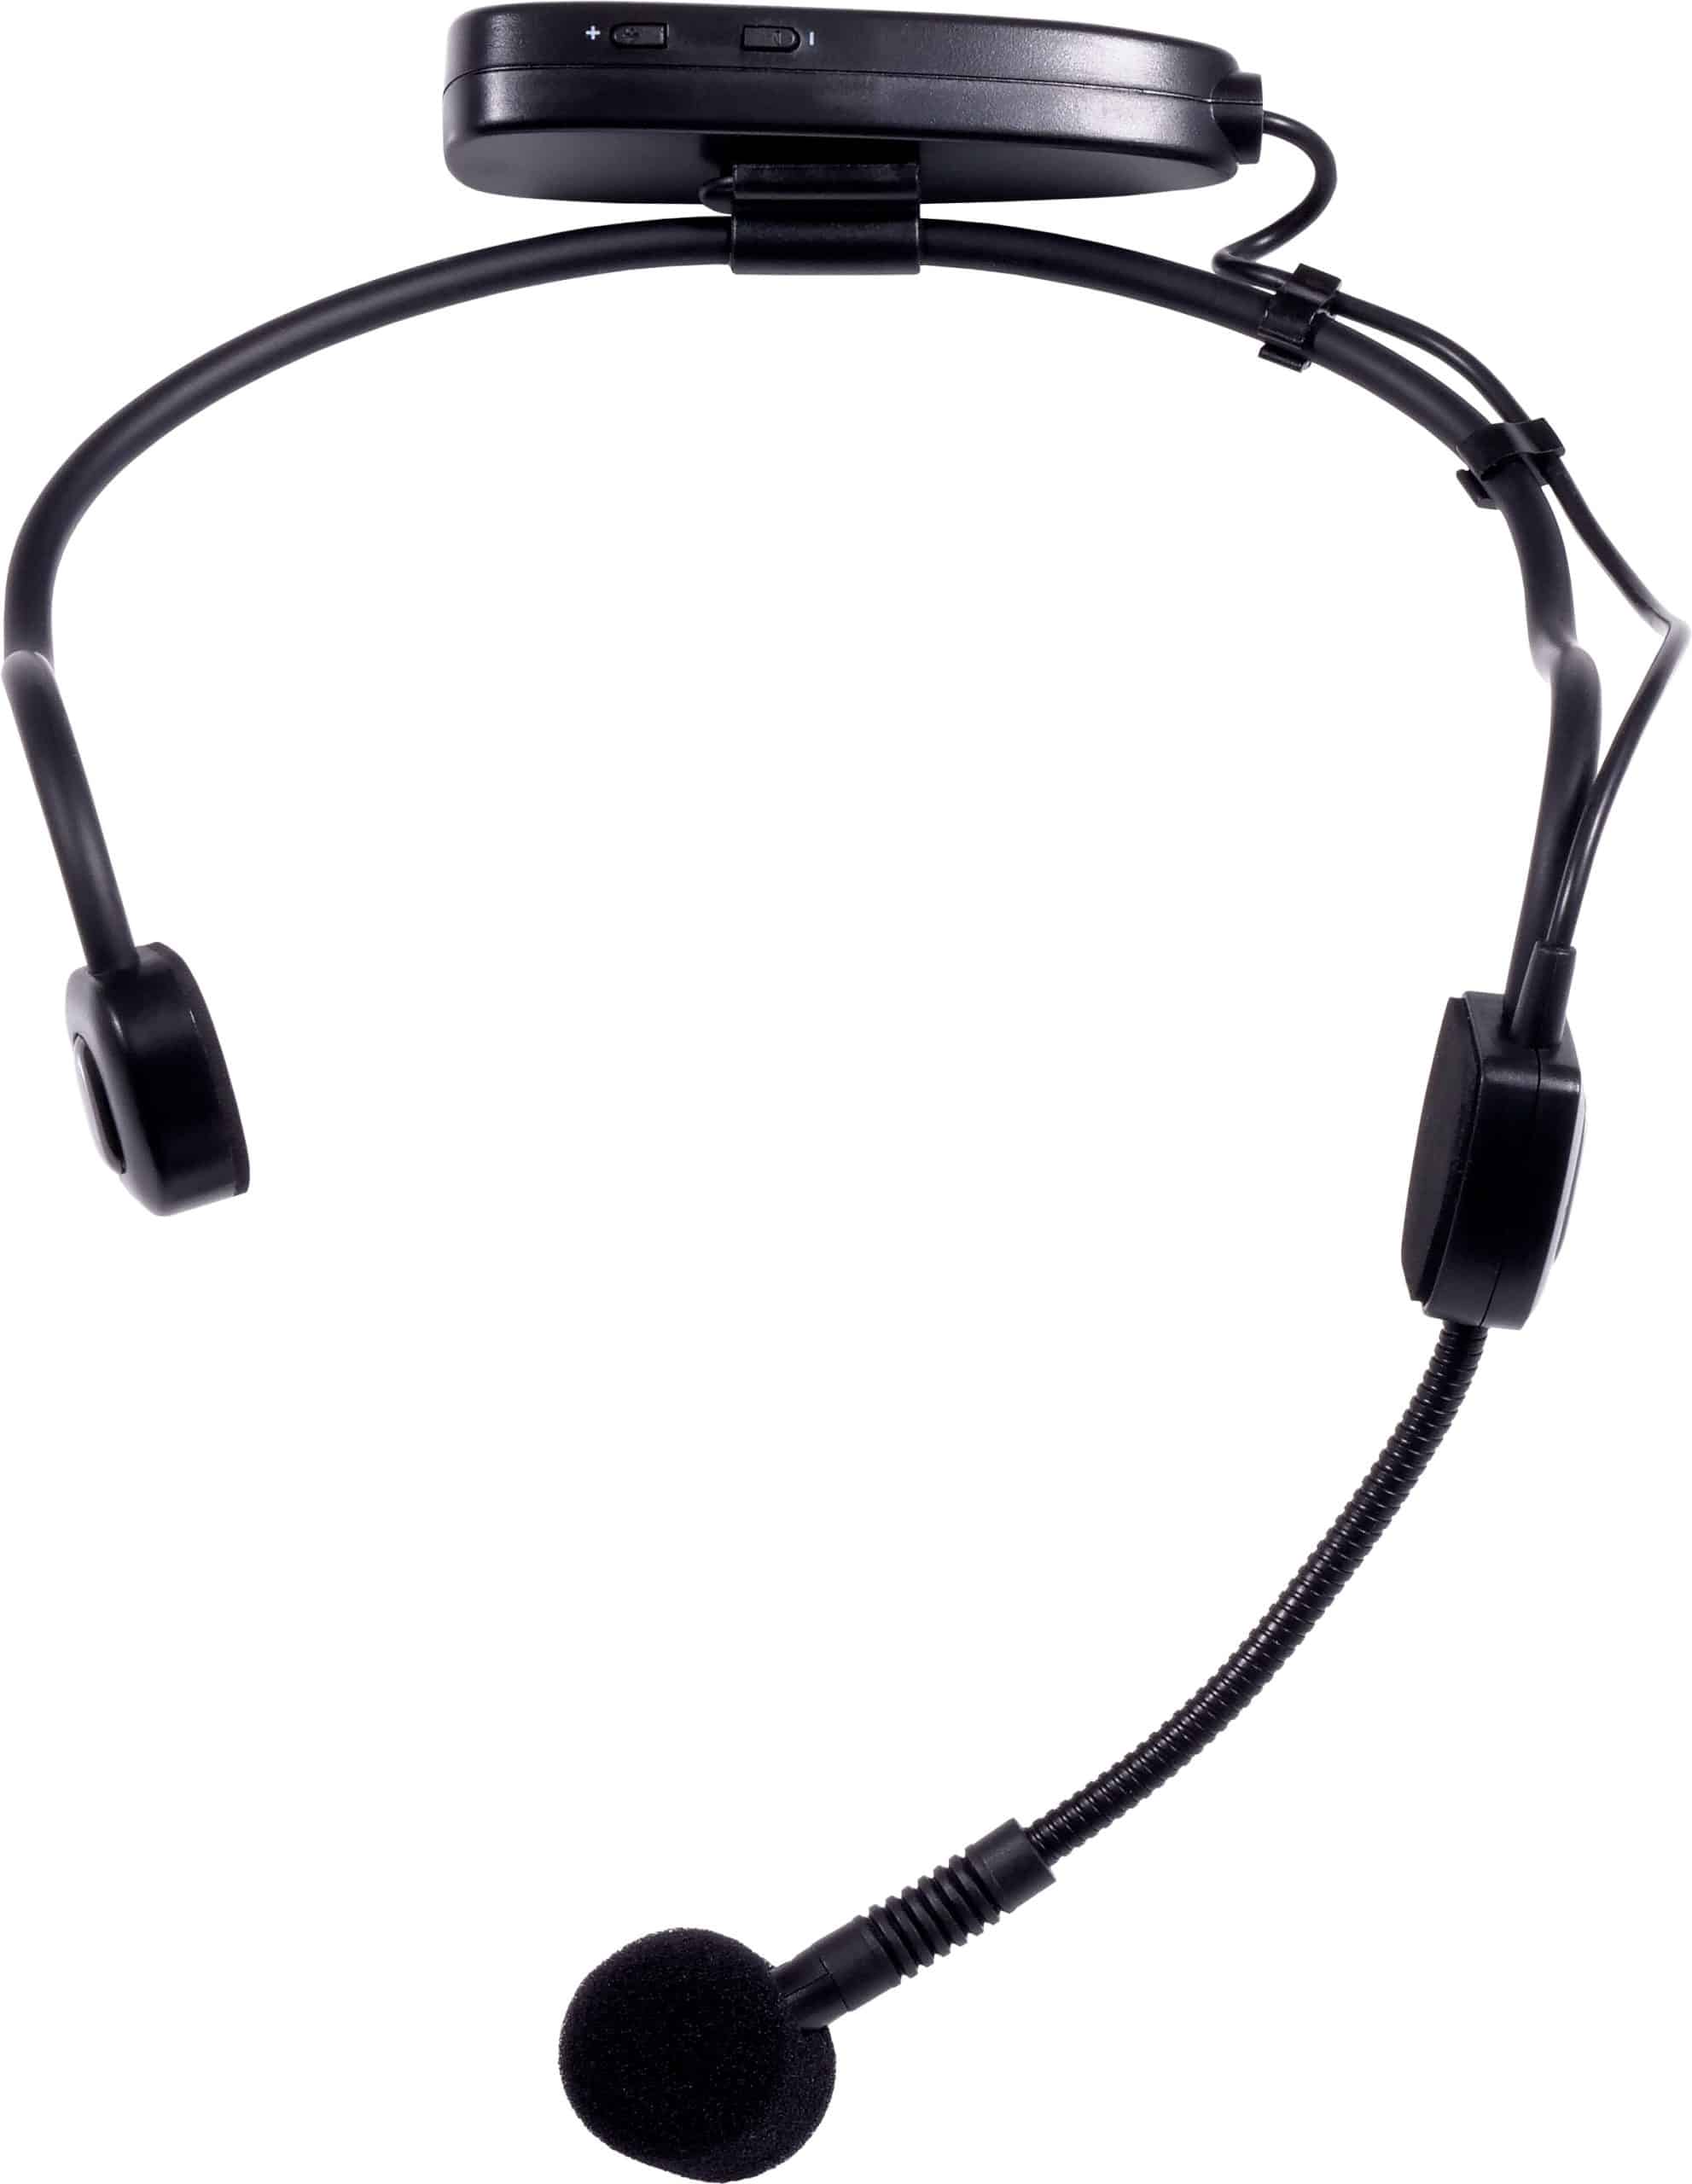 EVO-GTS Cableless Headset Microphone top view